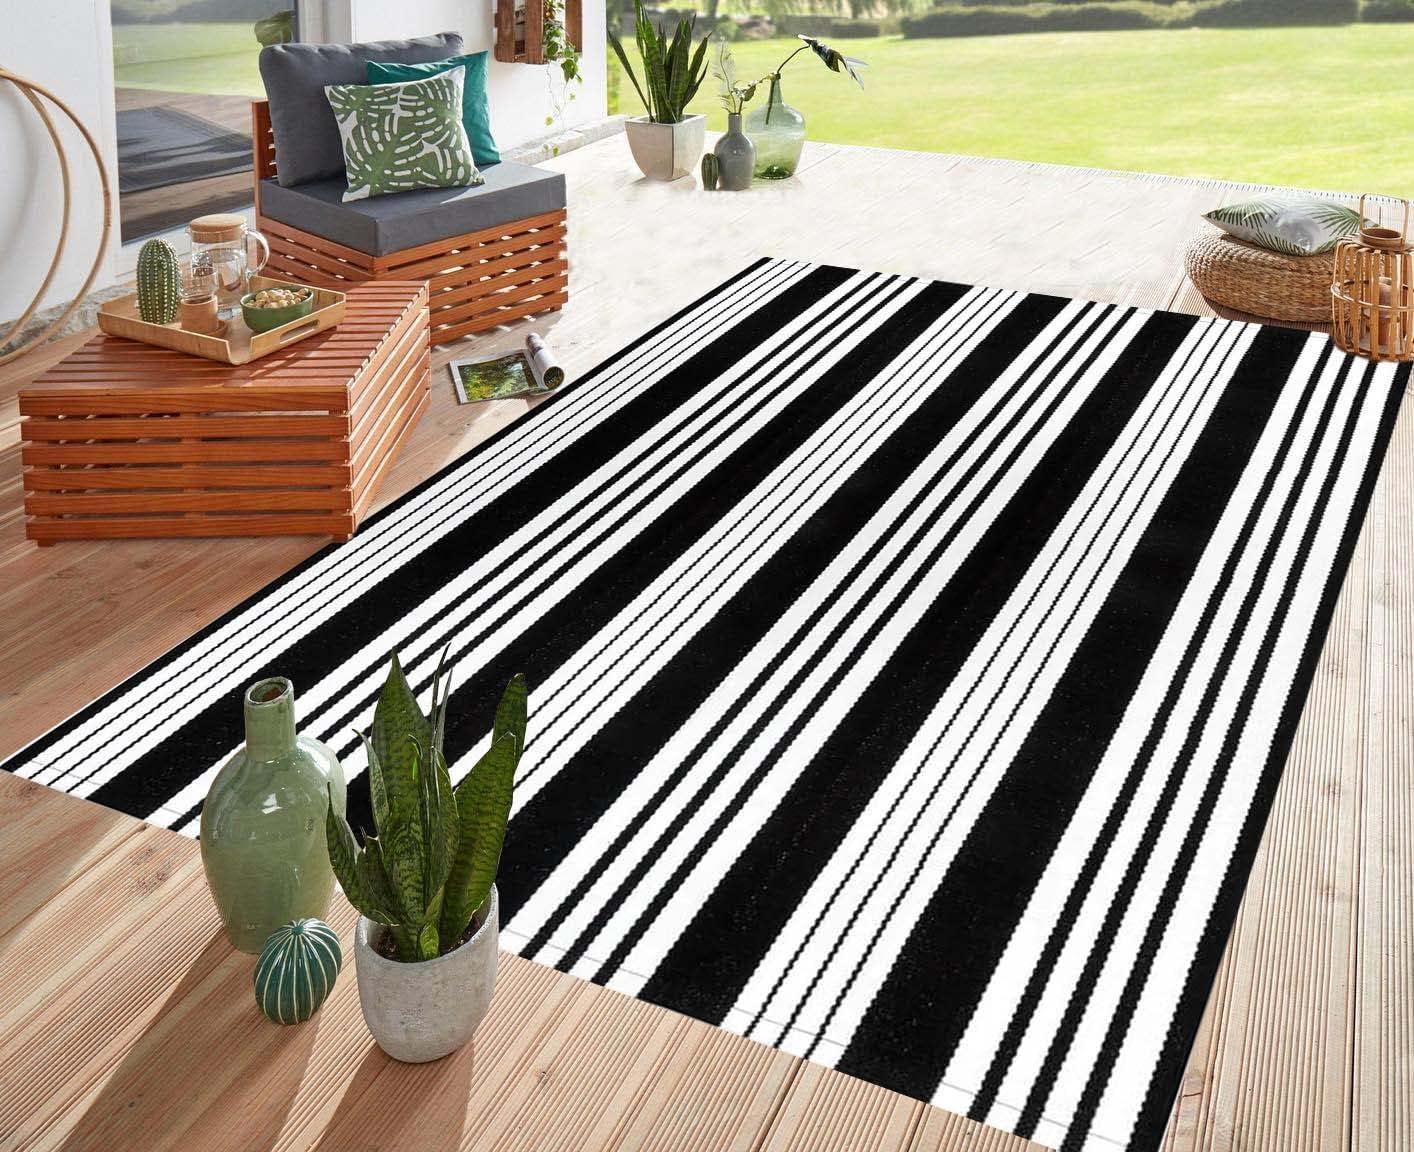 Black and White Outdoor Patio Rug Hand-Woven Cotton Striped Outdoor Rugs Washable Rug Indoor/Outdoor Area Rug Floor Mat